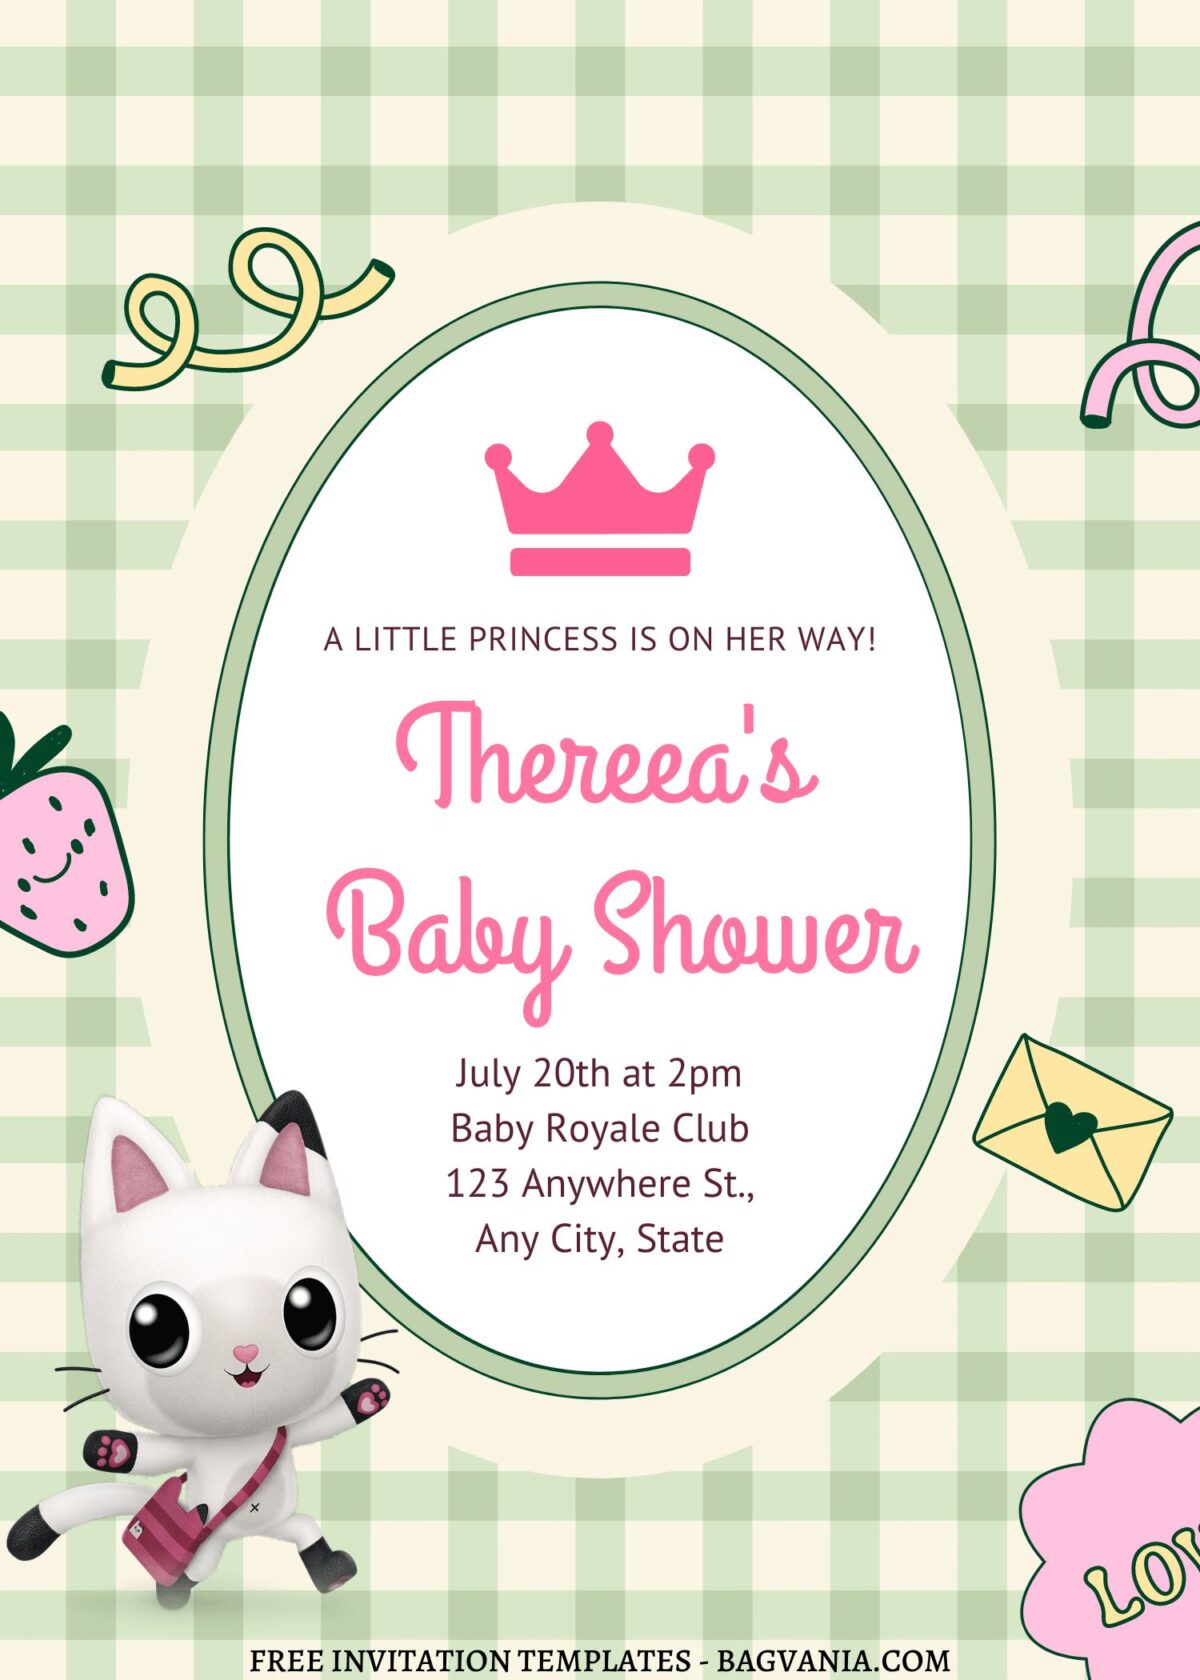 7+ Gabby Dollhouse And Her Furry Friends Canva Birthday Invitation Templates with Gingham pattern